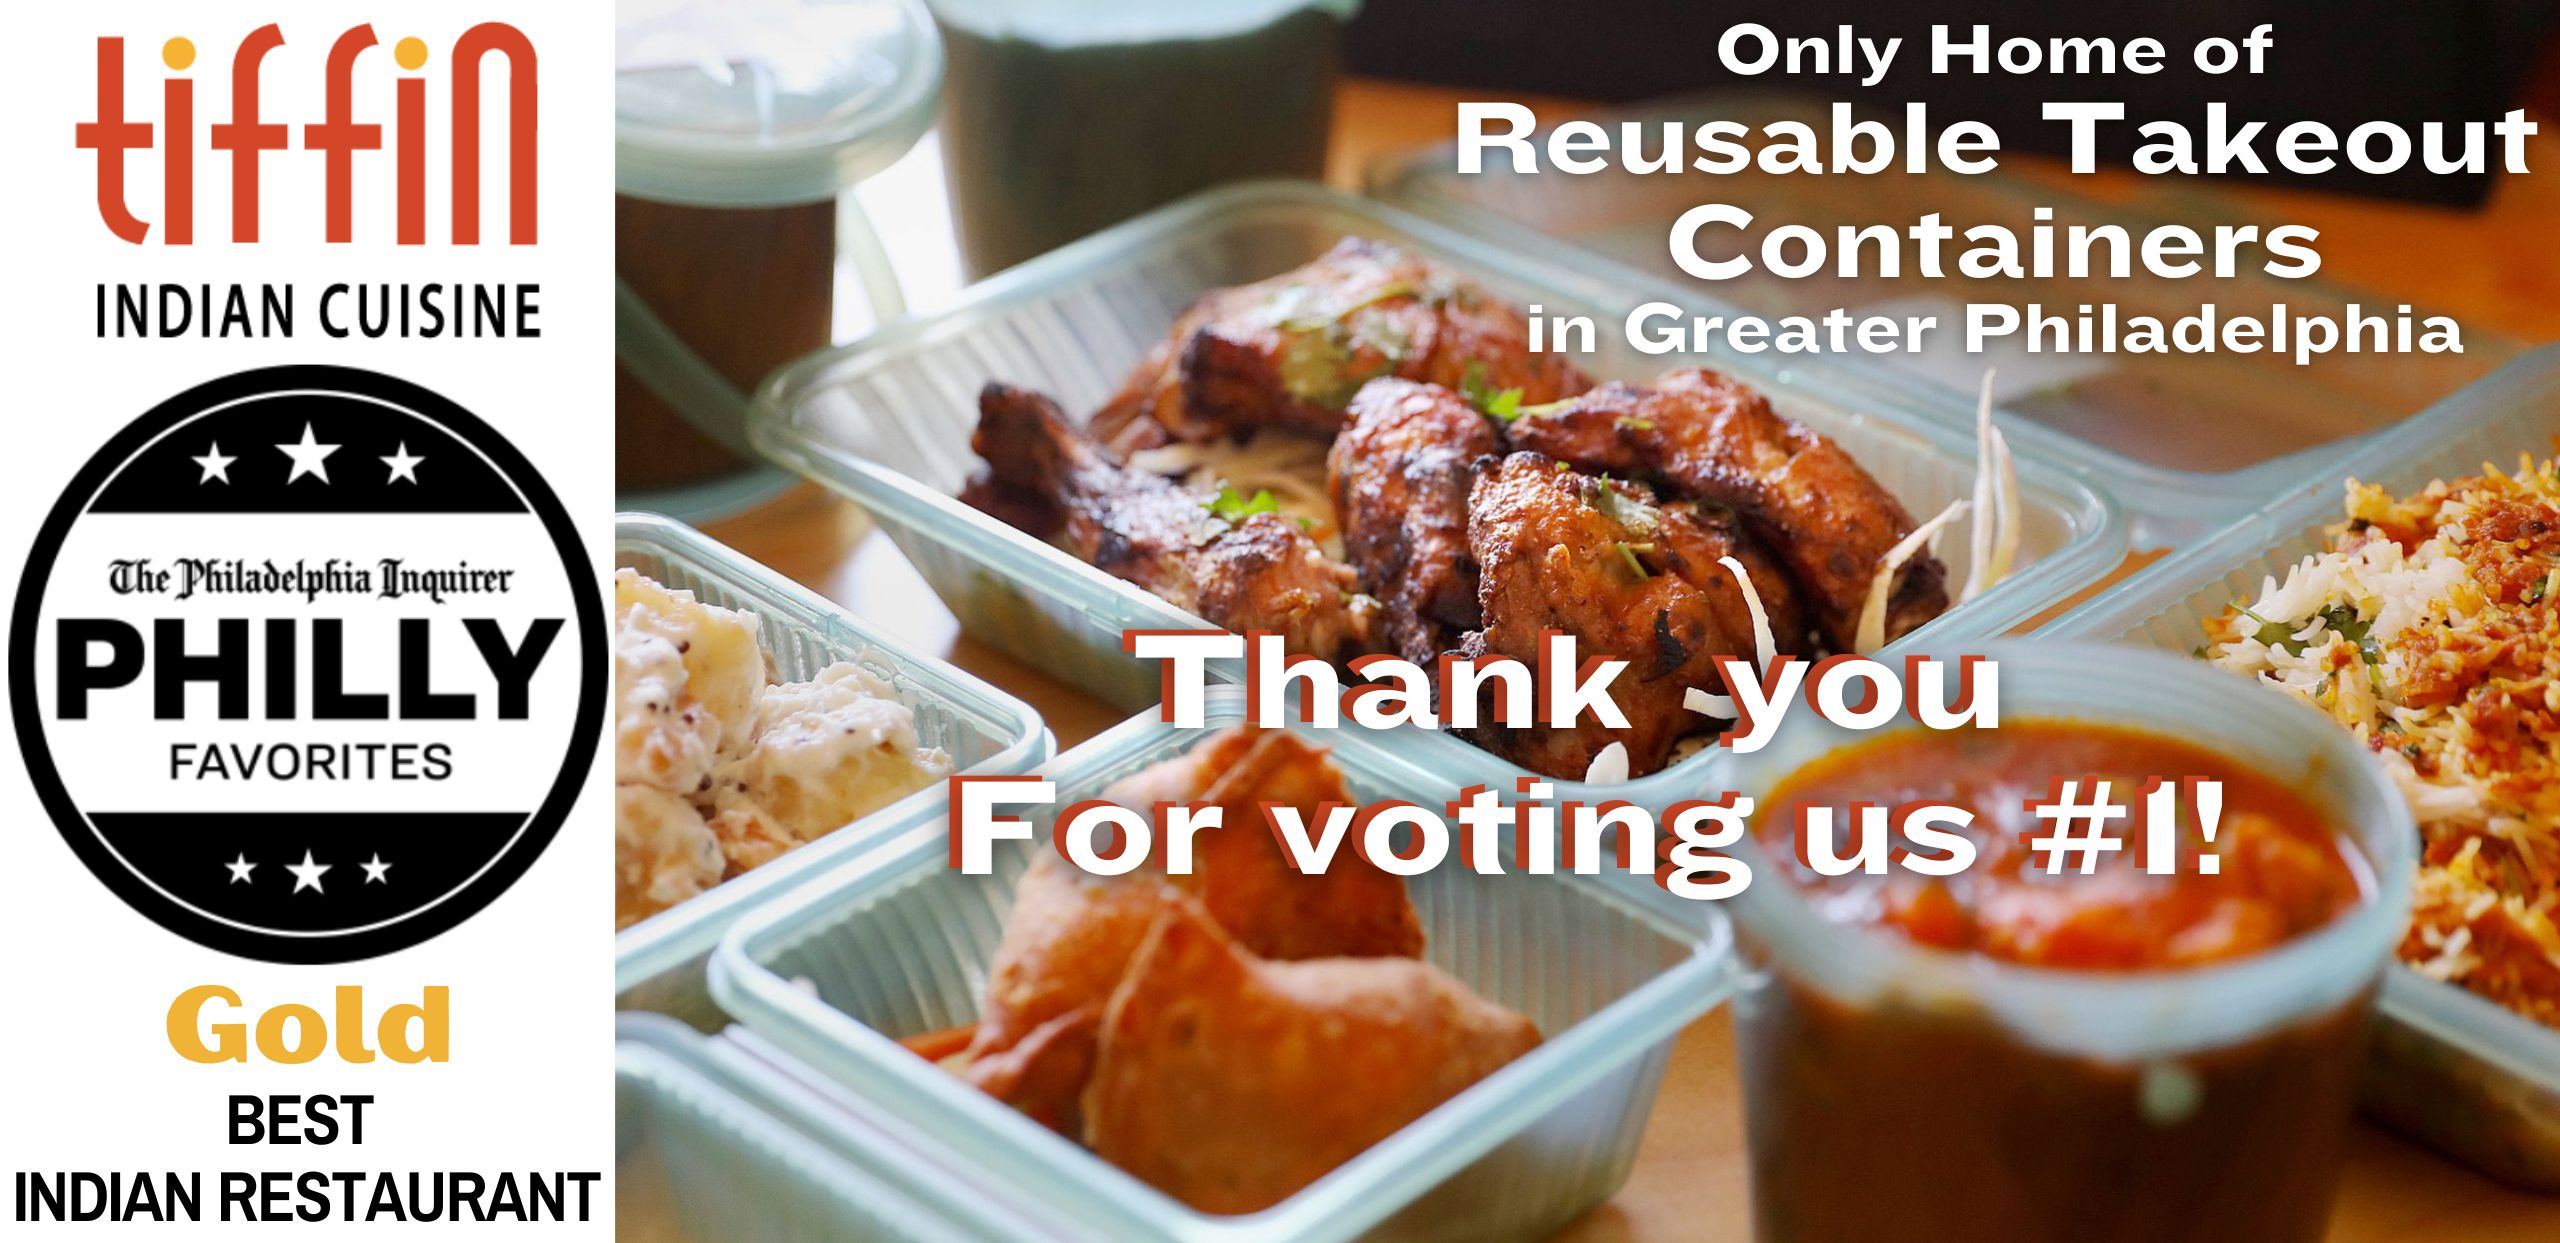 Thank you for voting tiffin Best Indian Restaurant!